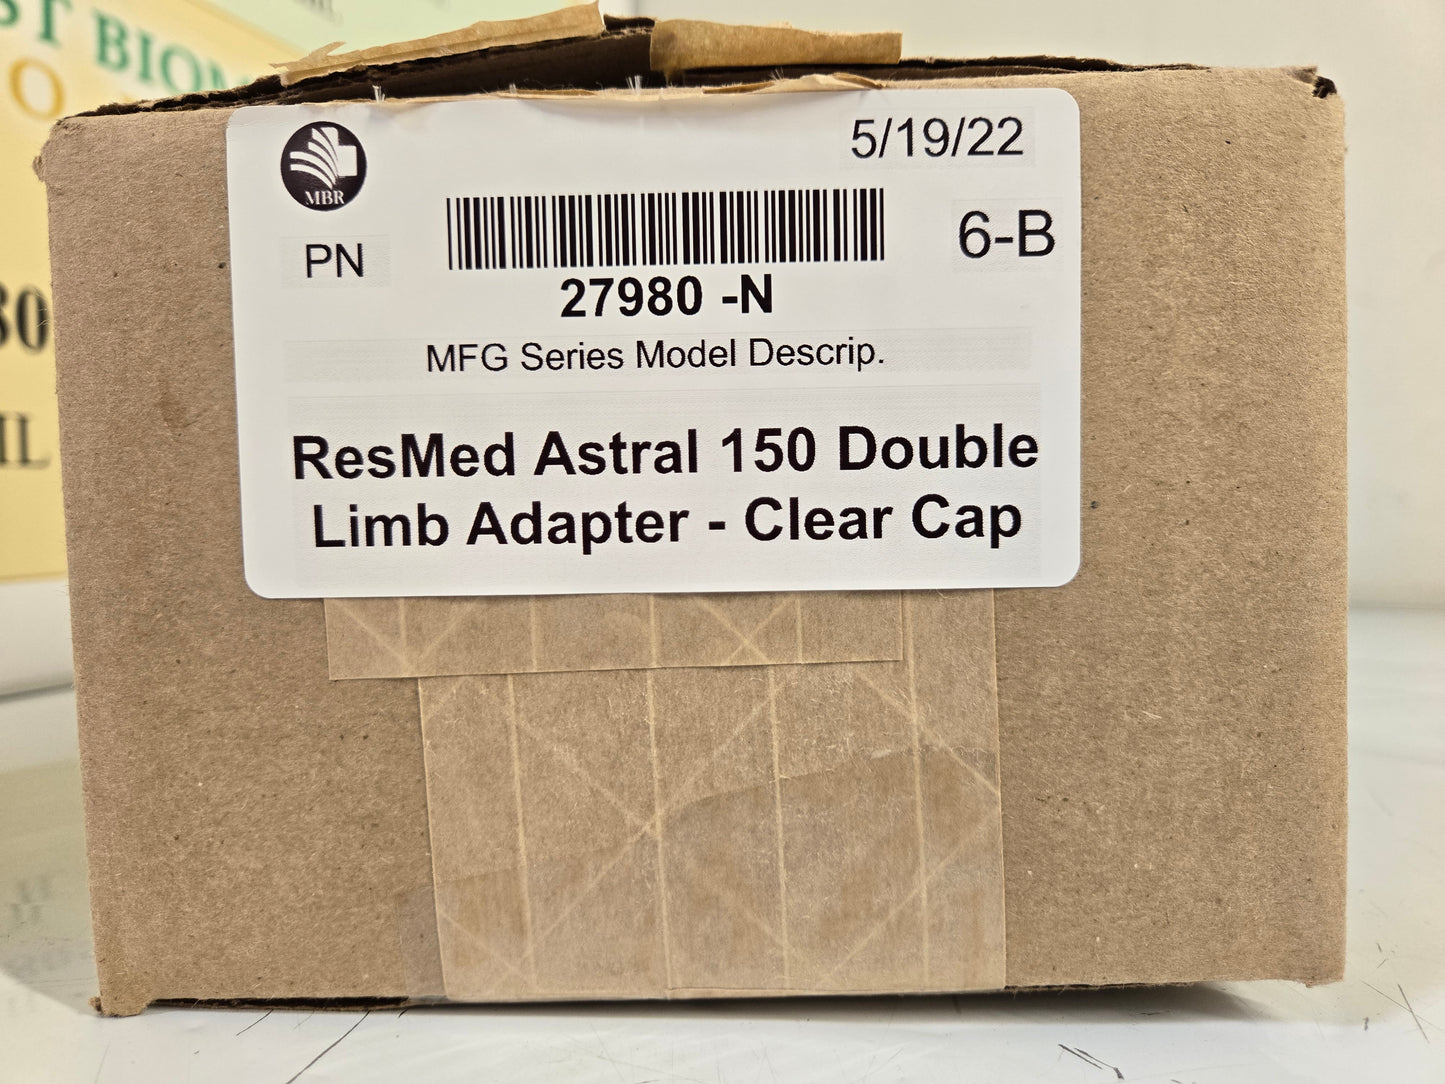 NEW ResMed Astral 150 Double Limb Adapter - Clear Cap Ref PN 27980